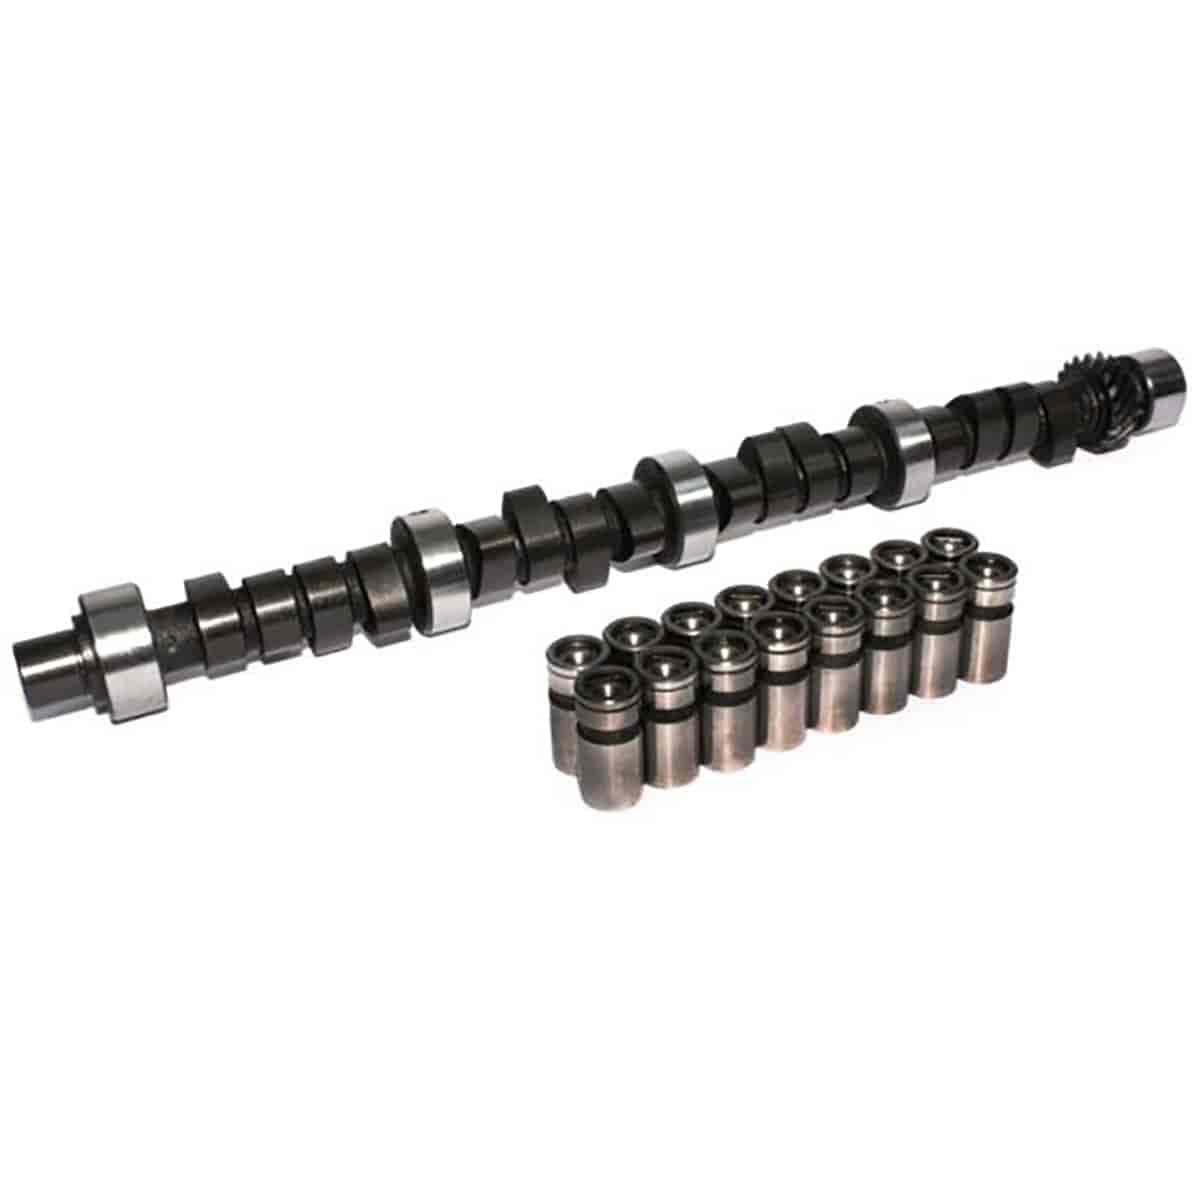 Voodoo Hydraulic Flat Tappet Camshaft and Lifter Kit